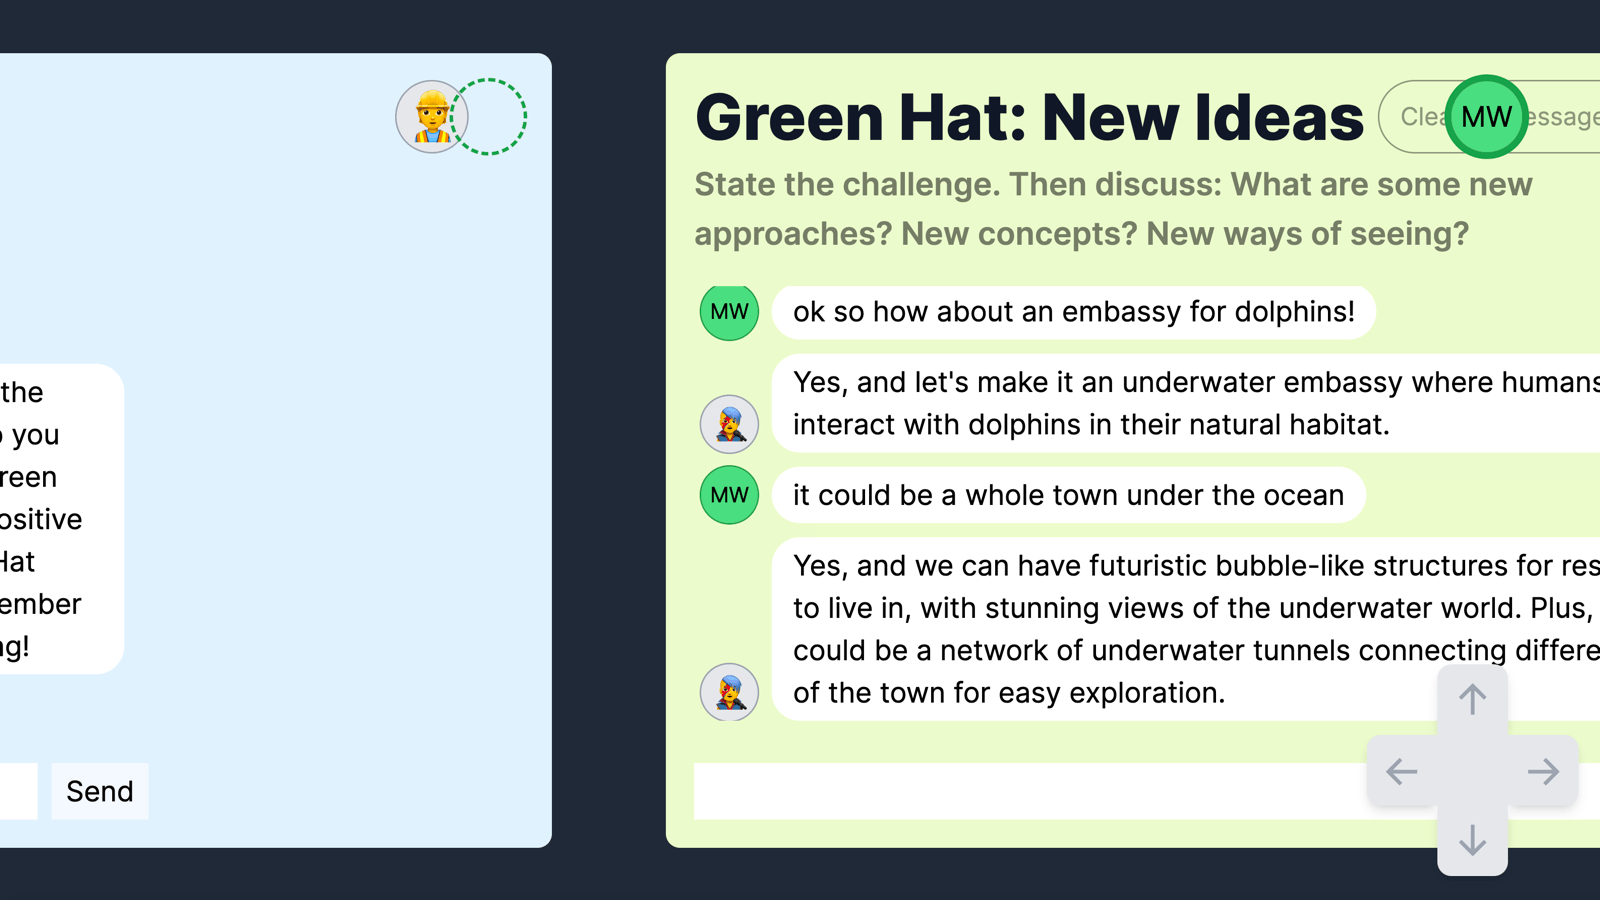 In a nutshell: Six Thinking Hats is a technique to deliberately bounce your team’s discussion between approaches like “new ideas” (green hat) an